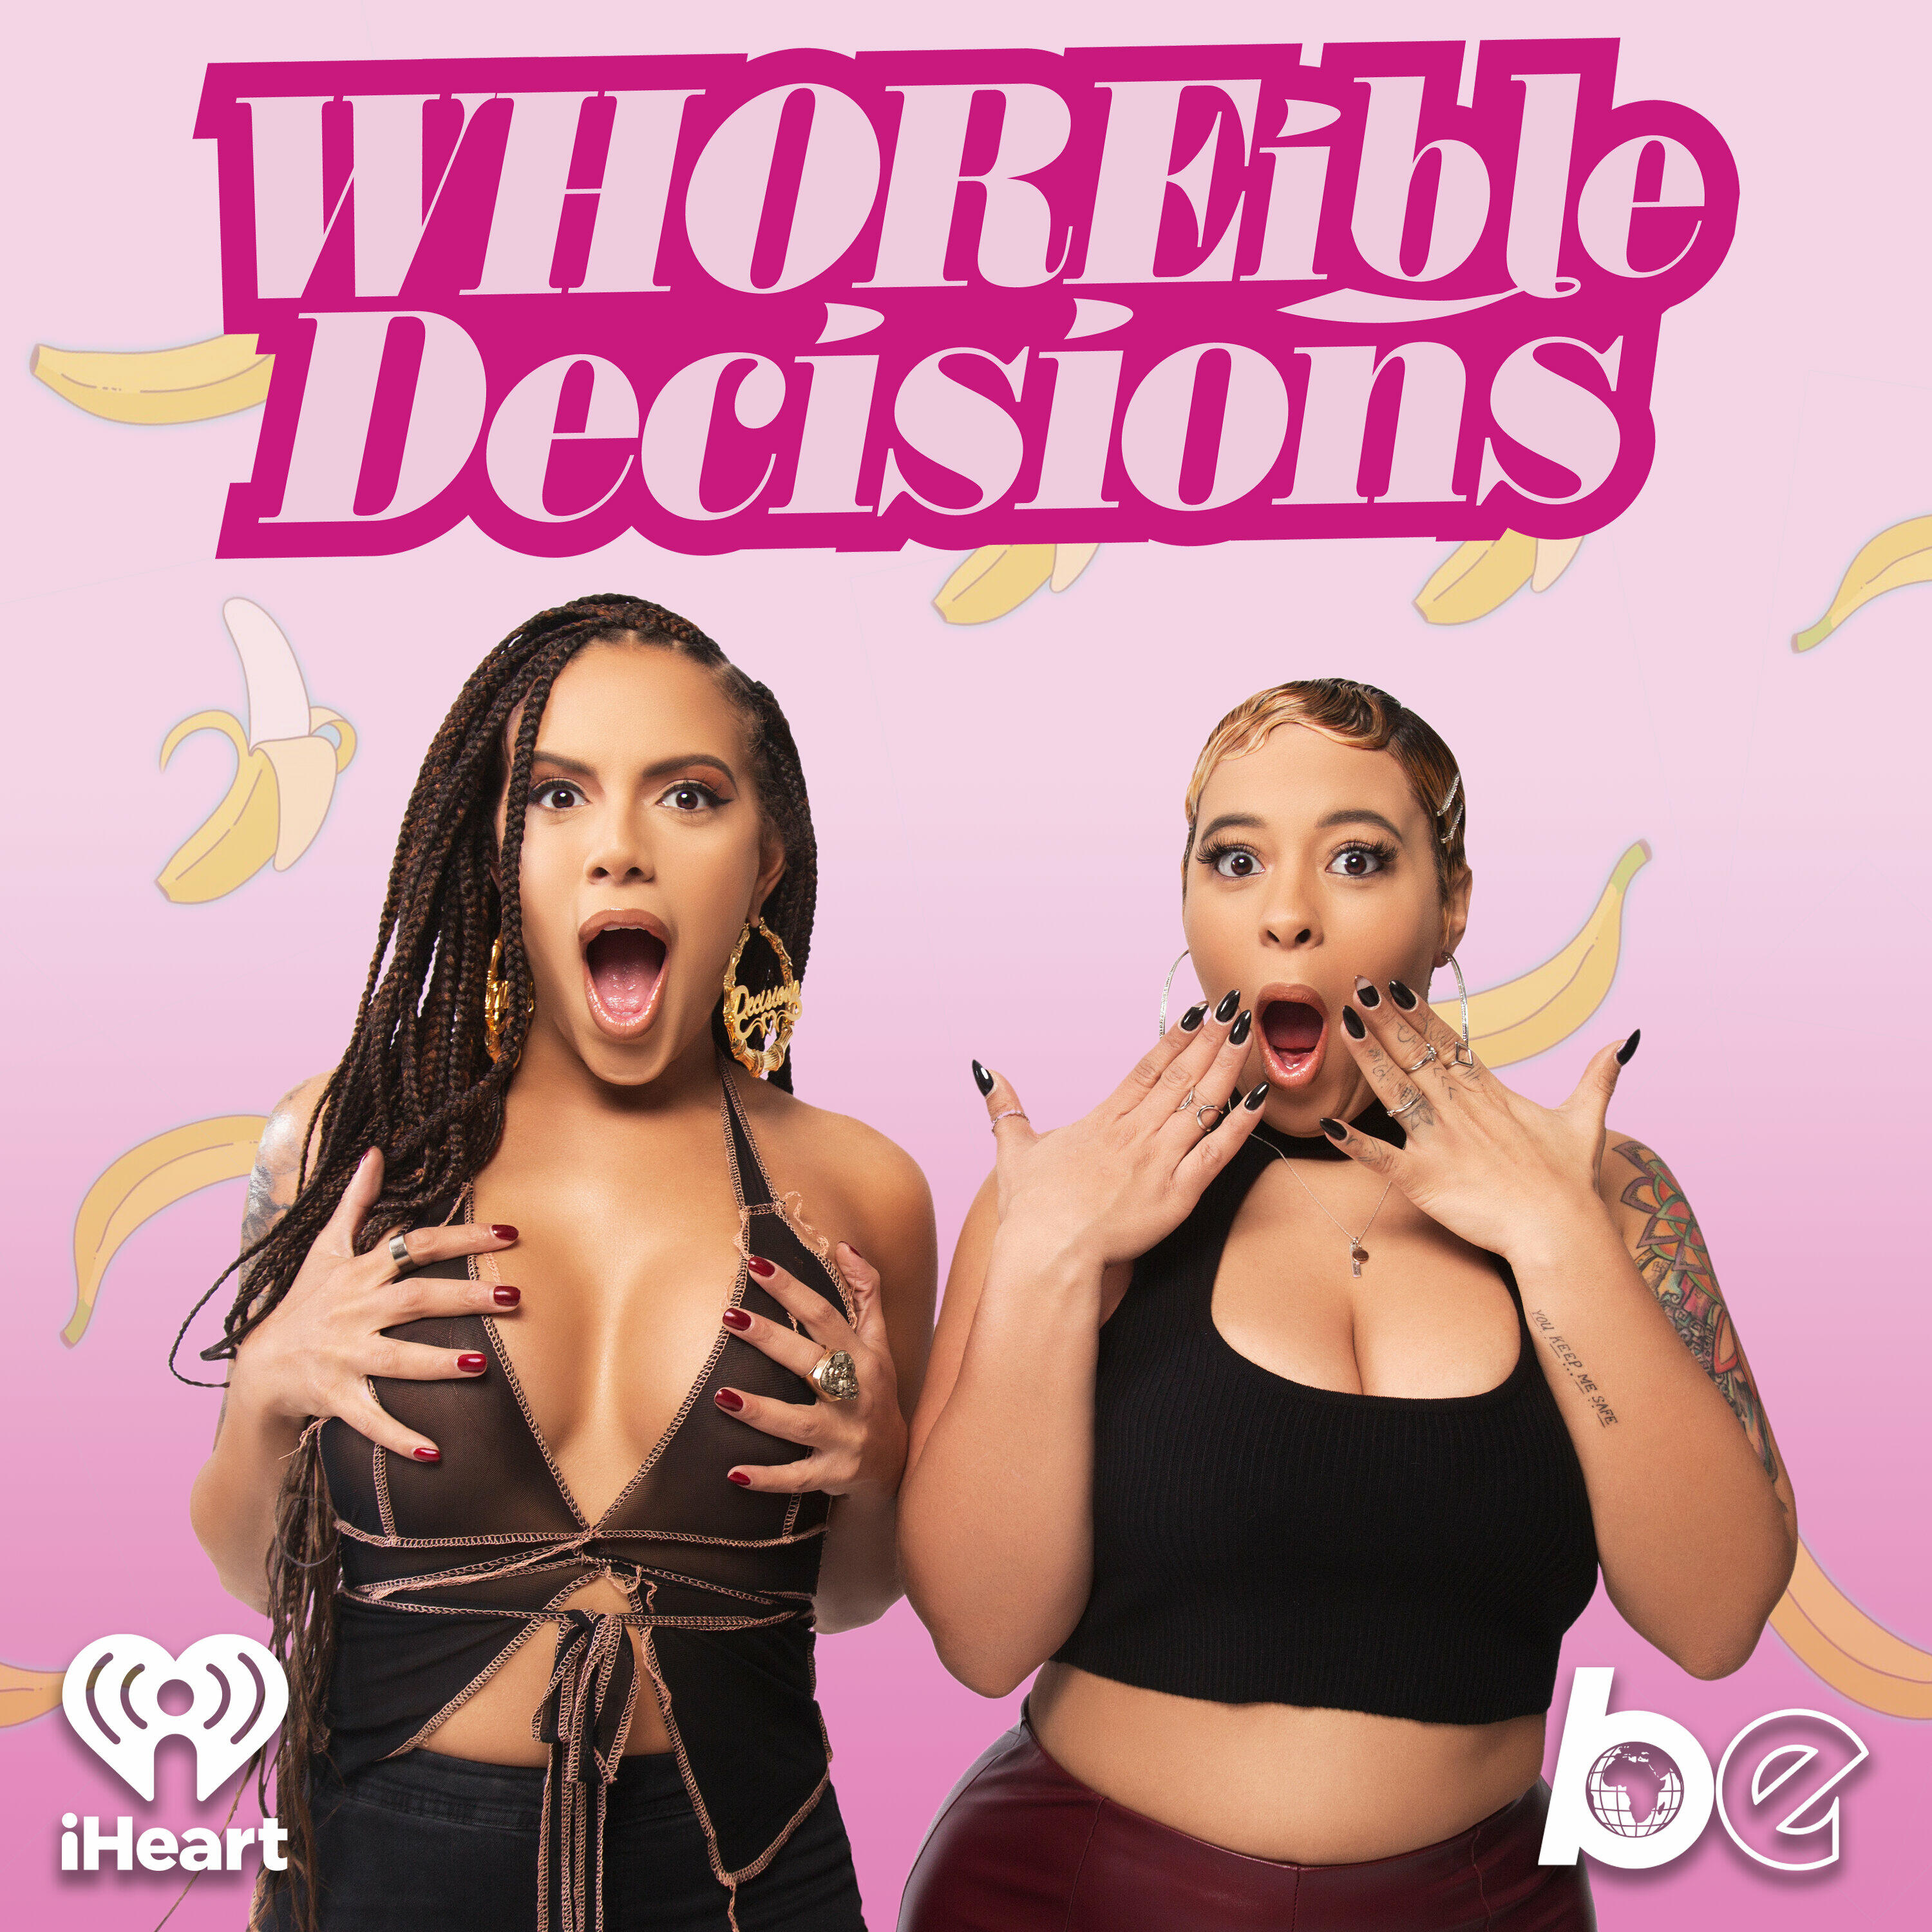 WHOREible decisions iHeart